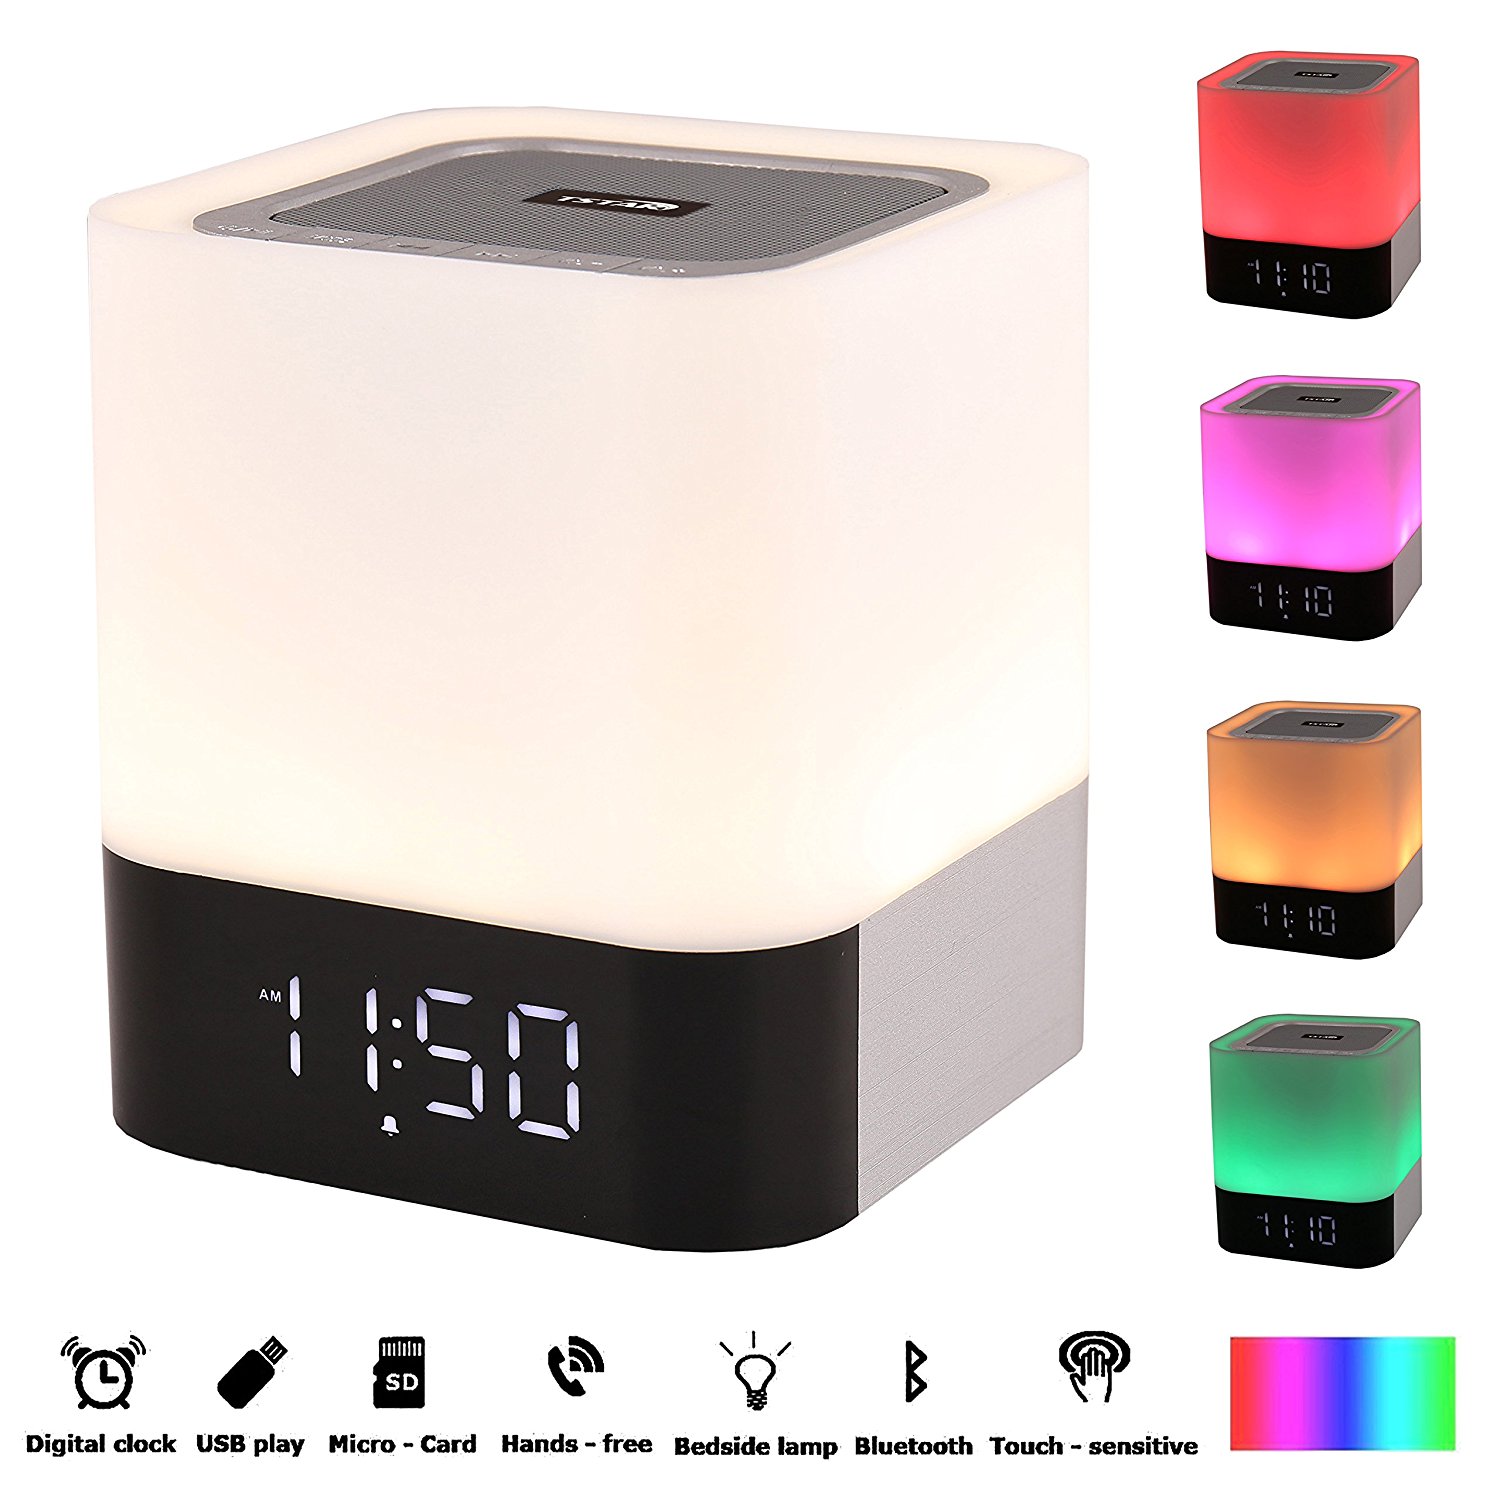 Wireless Bluetooth 4.0 Speaker Portable HIFI Stereo with Led Light Lamp and Alarm Clock, Hands-free Calls,Quality Sound, Touch Sensor, MP3 Player, Support SD TF Card, 3.5mm AUX Jack (White)